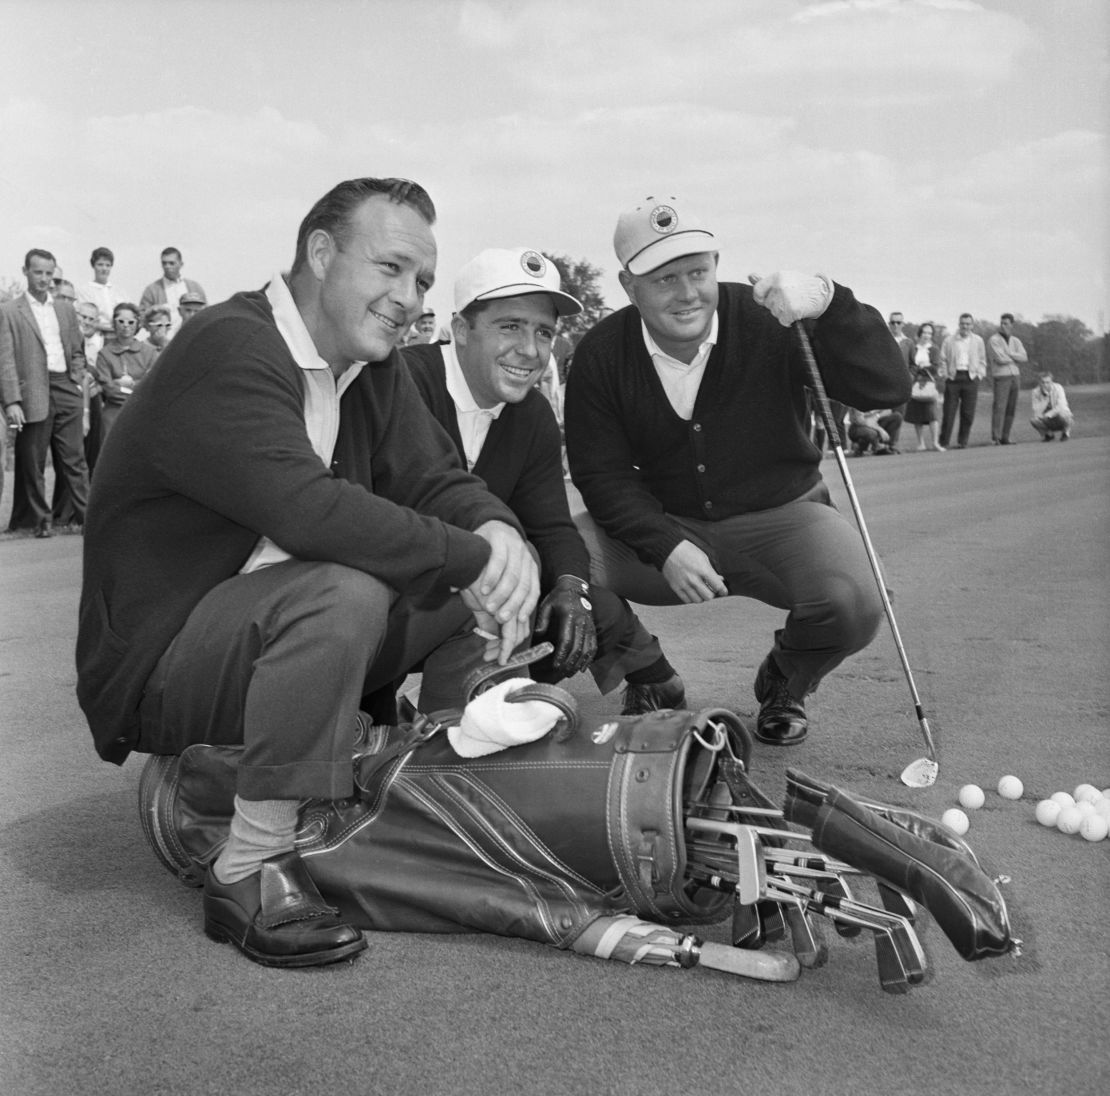 Palmer, Player and Nicklaus pose with their golf clubs before a practice round at the Firestone Country Club in Akron, Ohio.